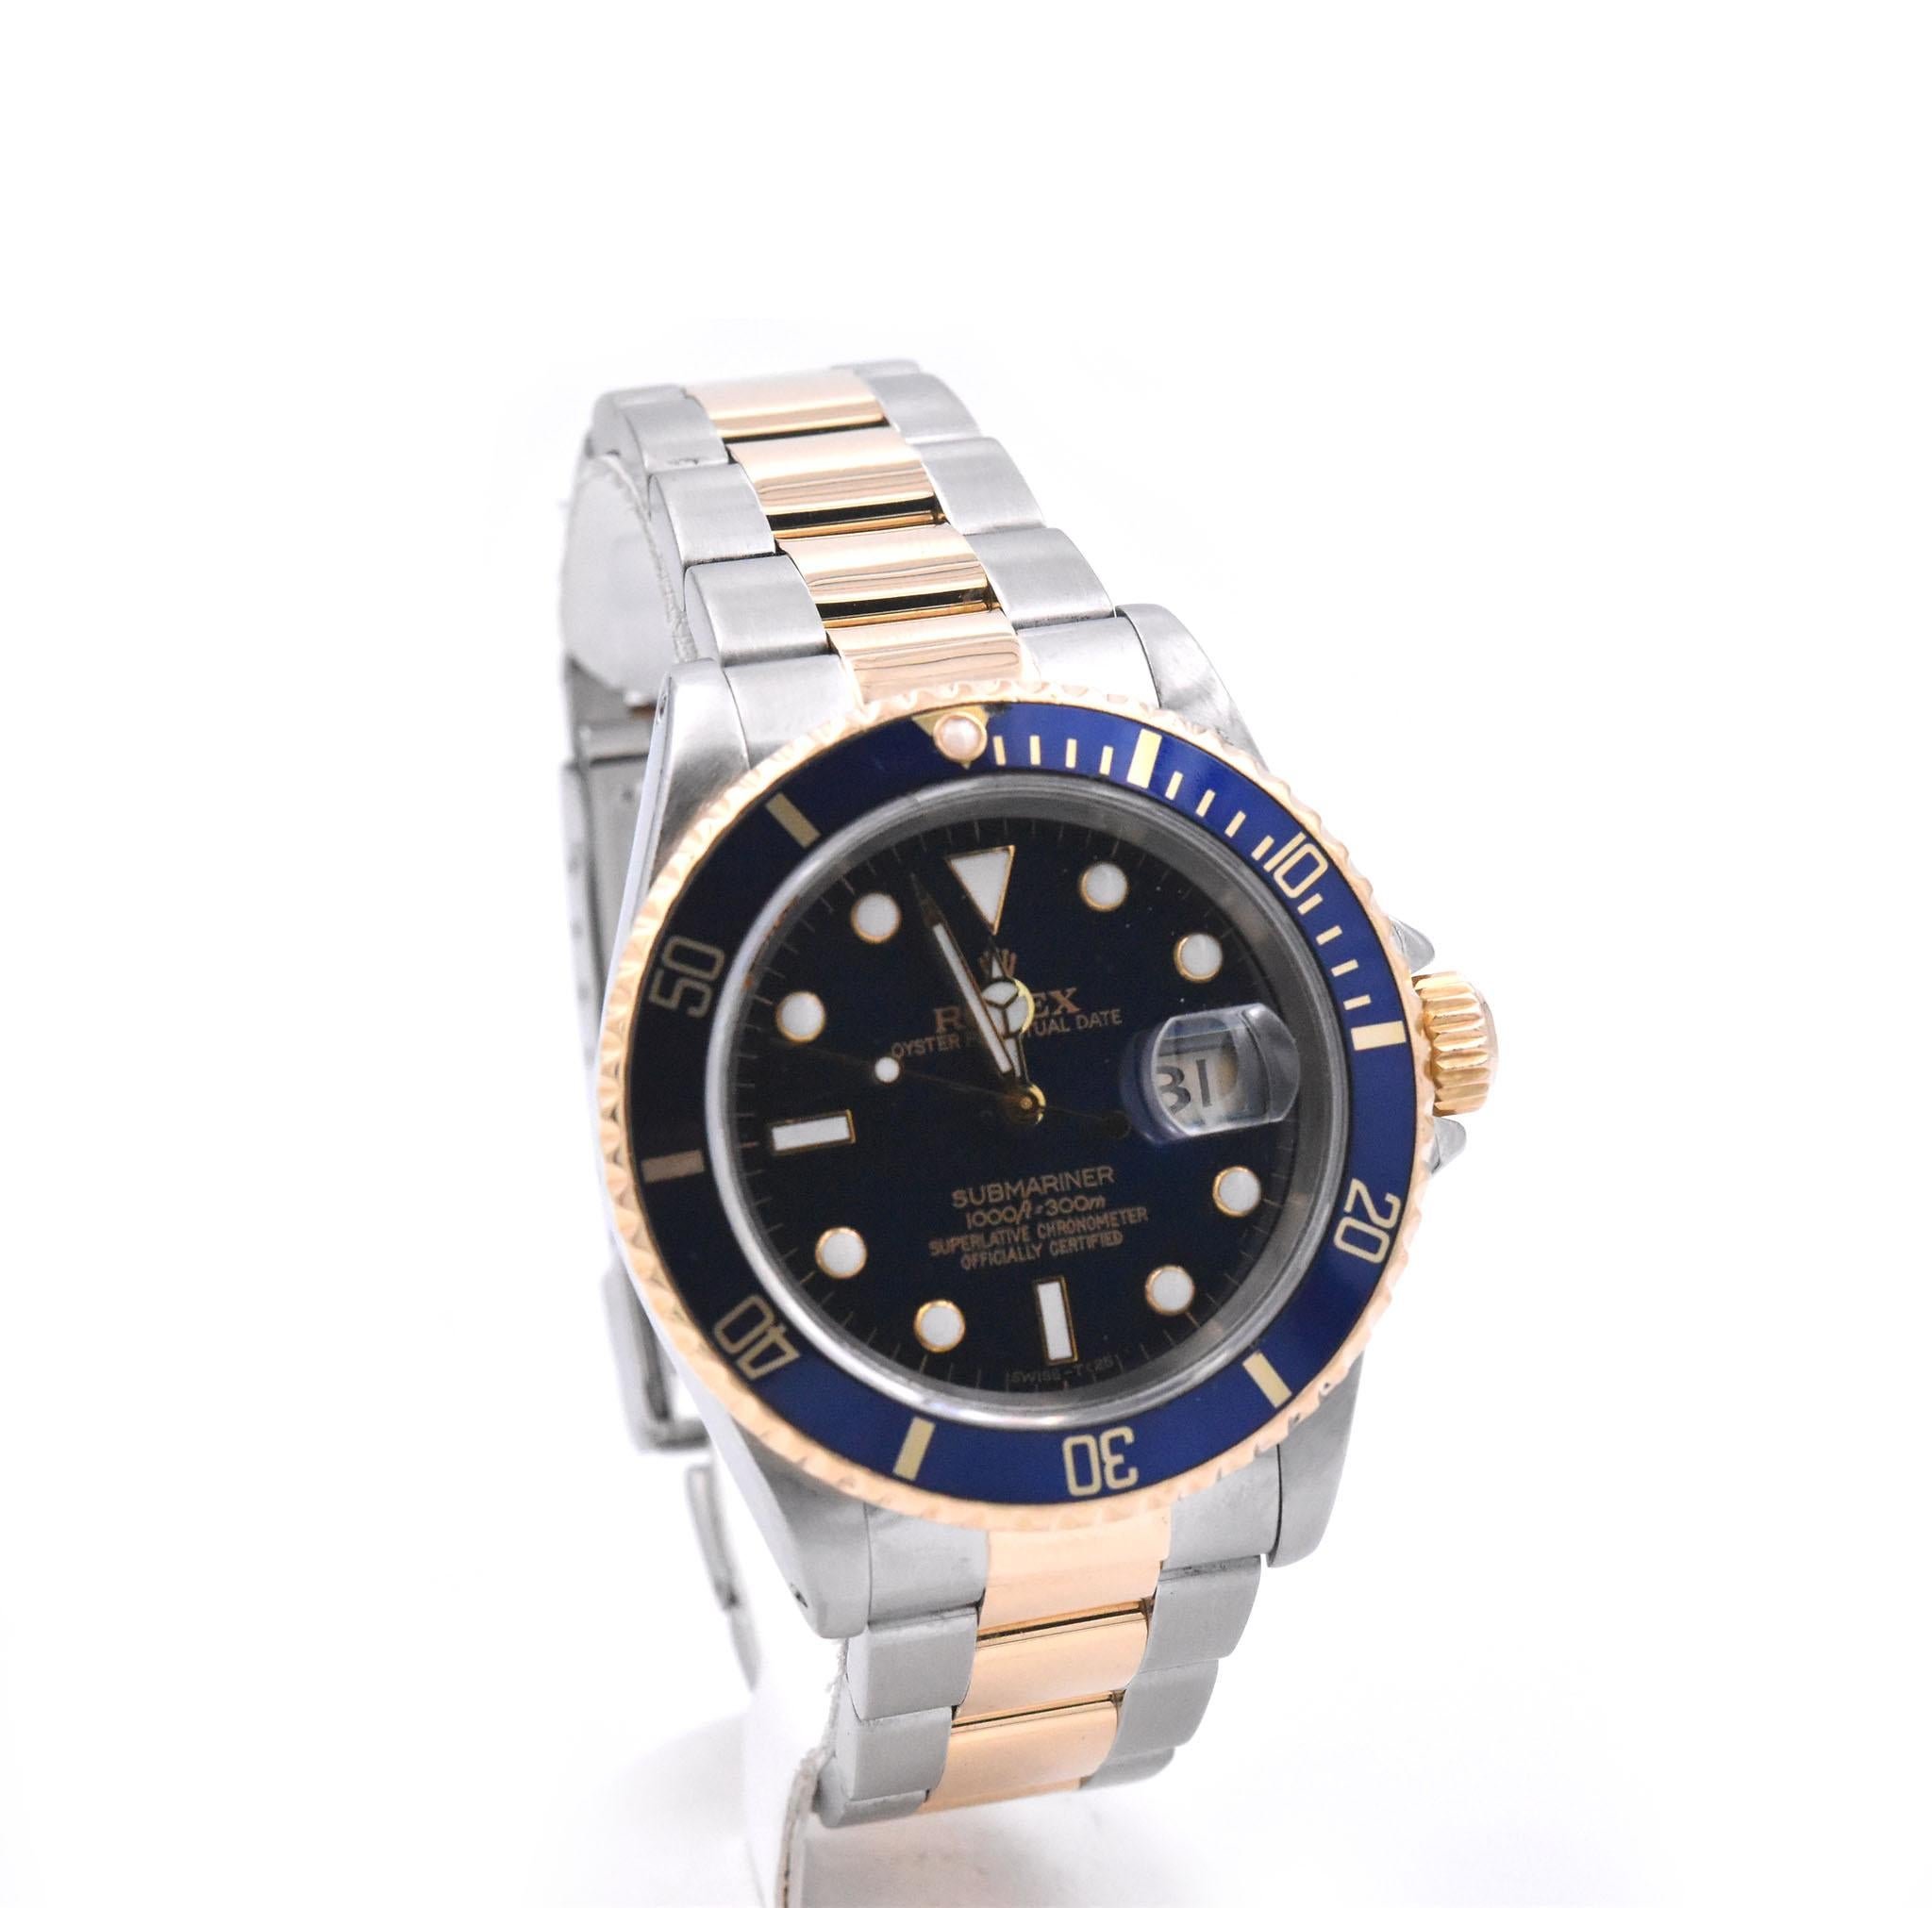 Movement: automatic 
Function: hours, minutes, seconds, date
Case: 40mm 18k yellow gold and stainless-steel case, sapphire crystal, 18k yellow gold bezel with blue insert, yellow gold screw-down crown, waterproof to 100 meters
Band: two-tone 18k